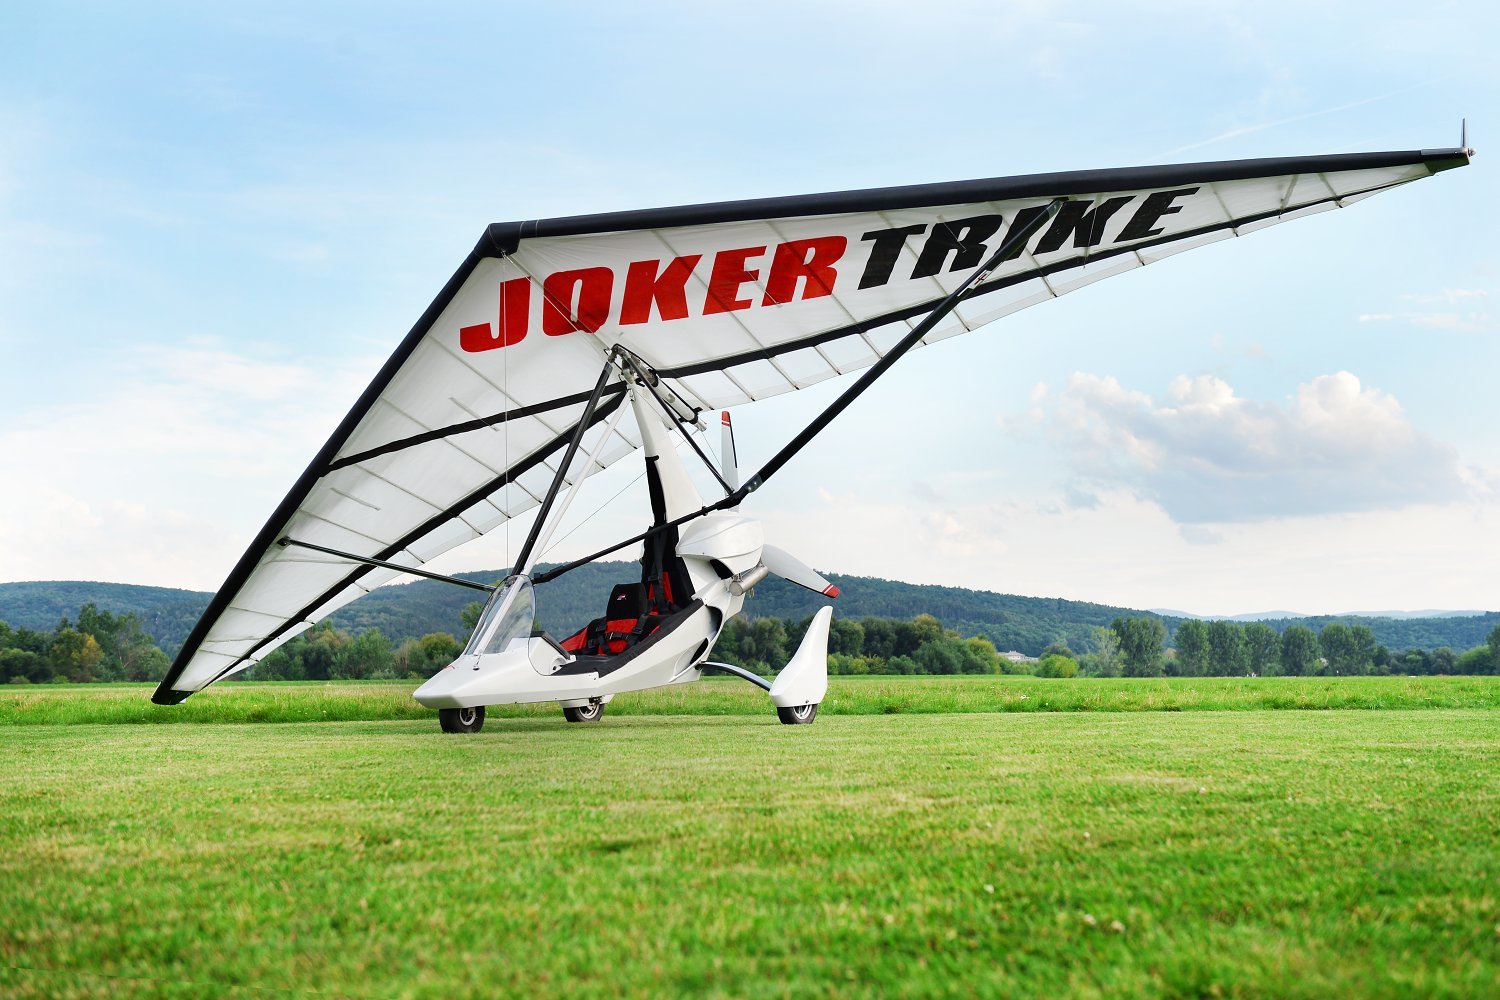 195 size hang glider for sale